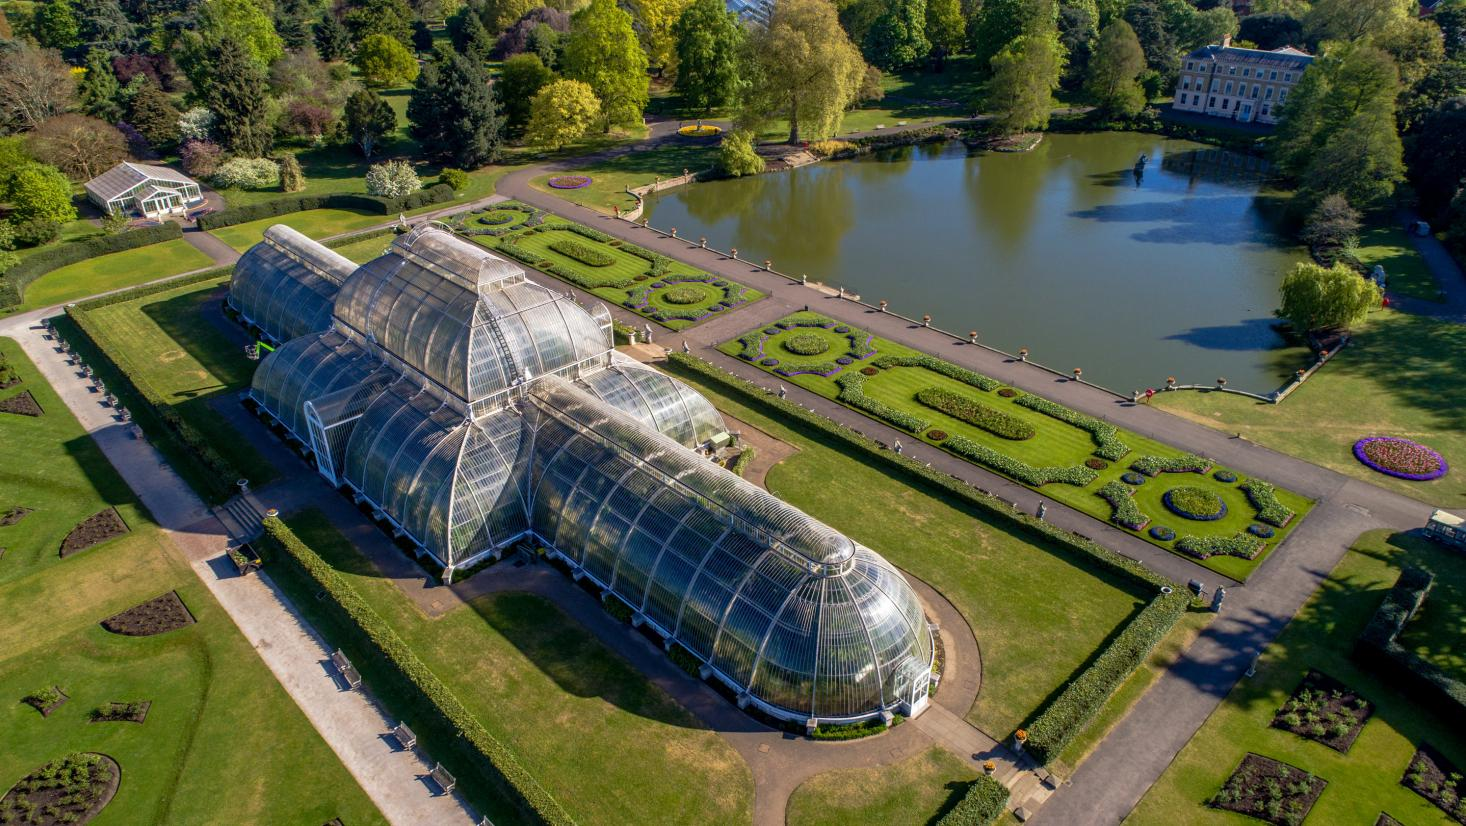 The Palm House at Kew Royal Botanic Gardens in England, originally constructed in 1844 as a home for exotic plant varieties brought back from abroad. | Source: itinari